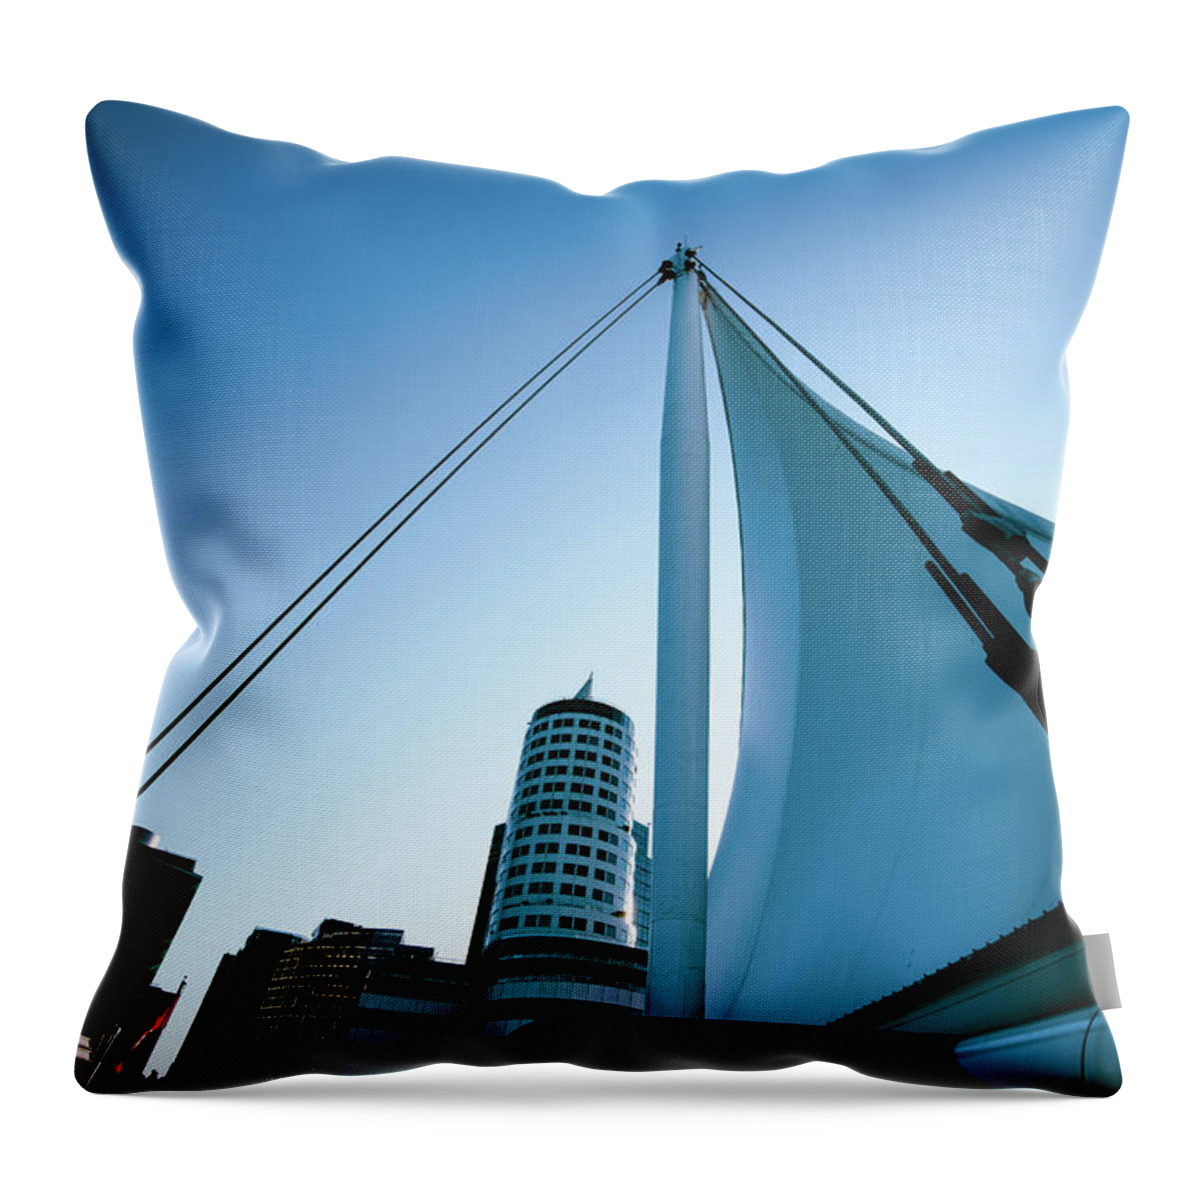 Port Of Vancouver Throw Pillow featuring the photograph 0178 Port of Vancouver Sails Canada Place by Amyn Nasser Neptune Gallery